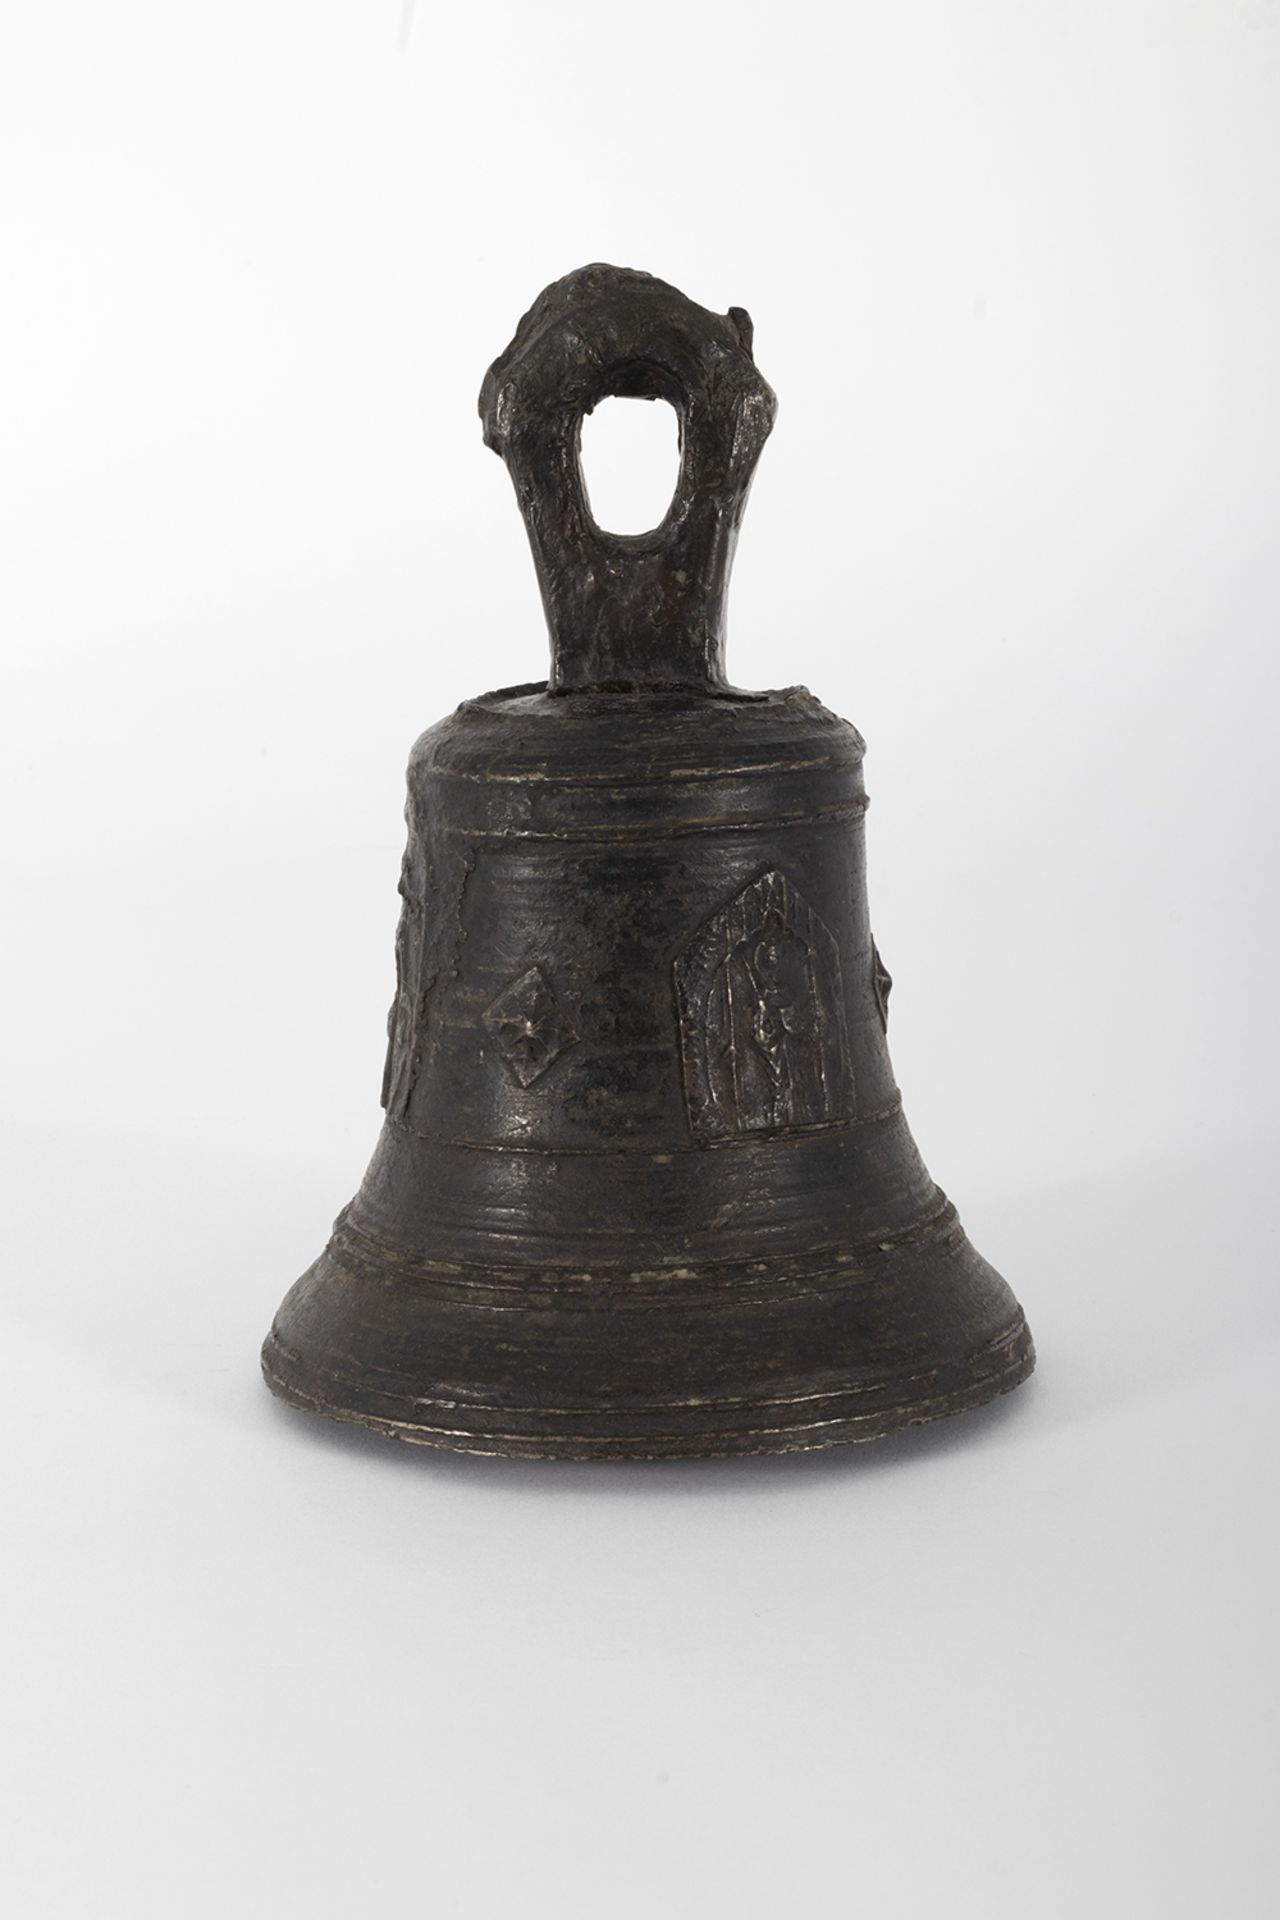 Bronze bell representing the Virgin of Mercy, Saint George and Saint Peter Nolasco, founder of the O